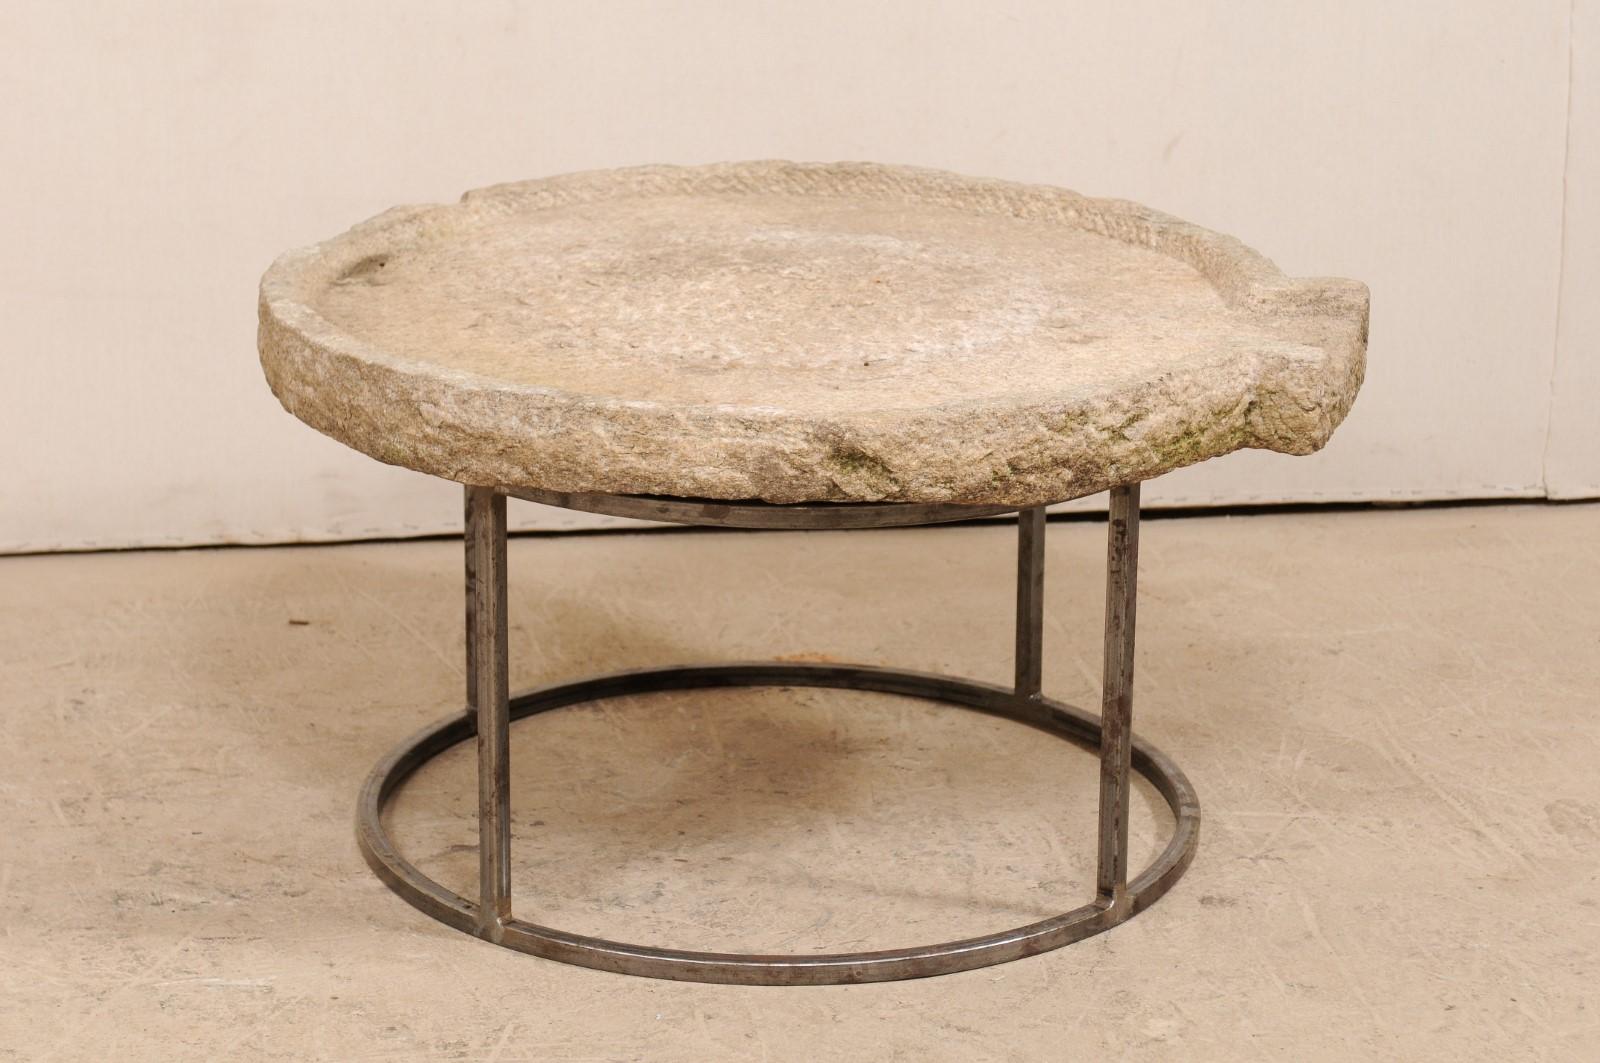 Hand-Carved 19th Century Mediterranean Stone Olive Oil Trough Table on Custom Base